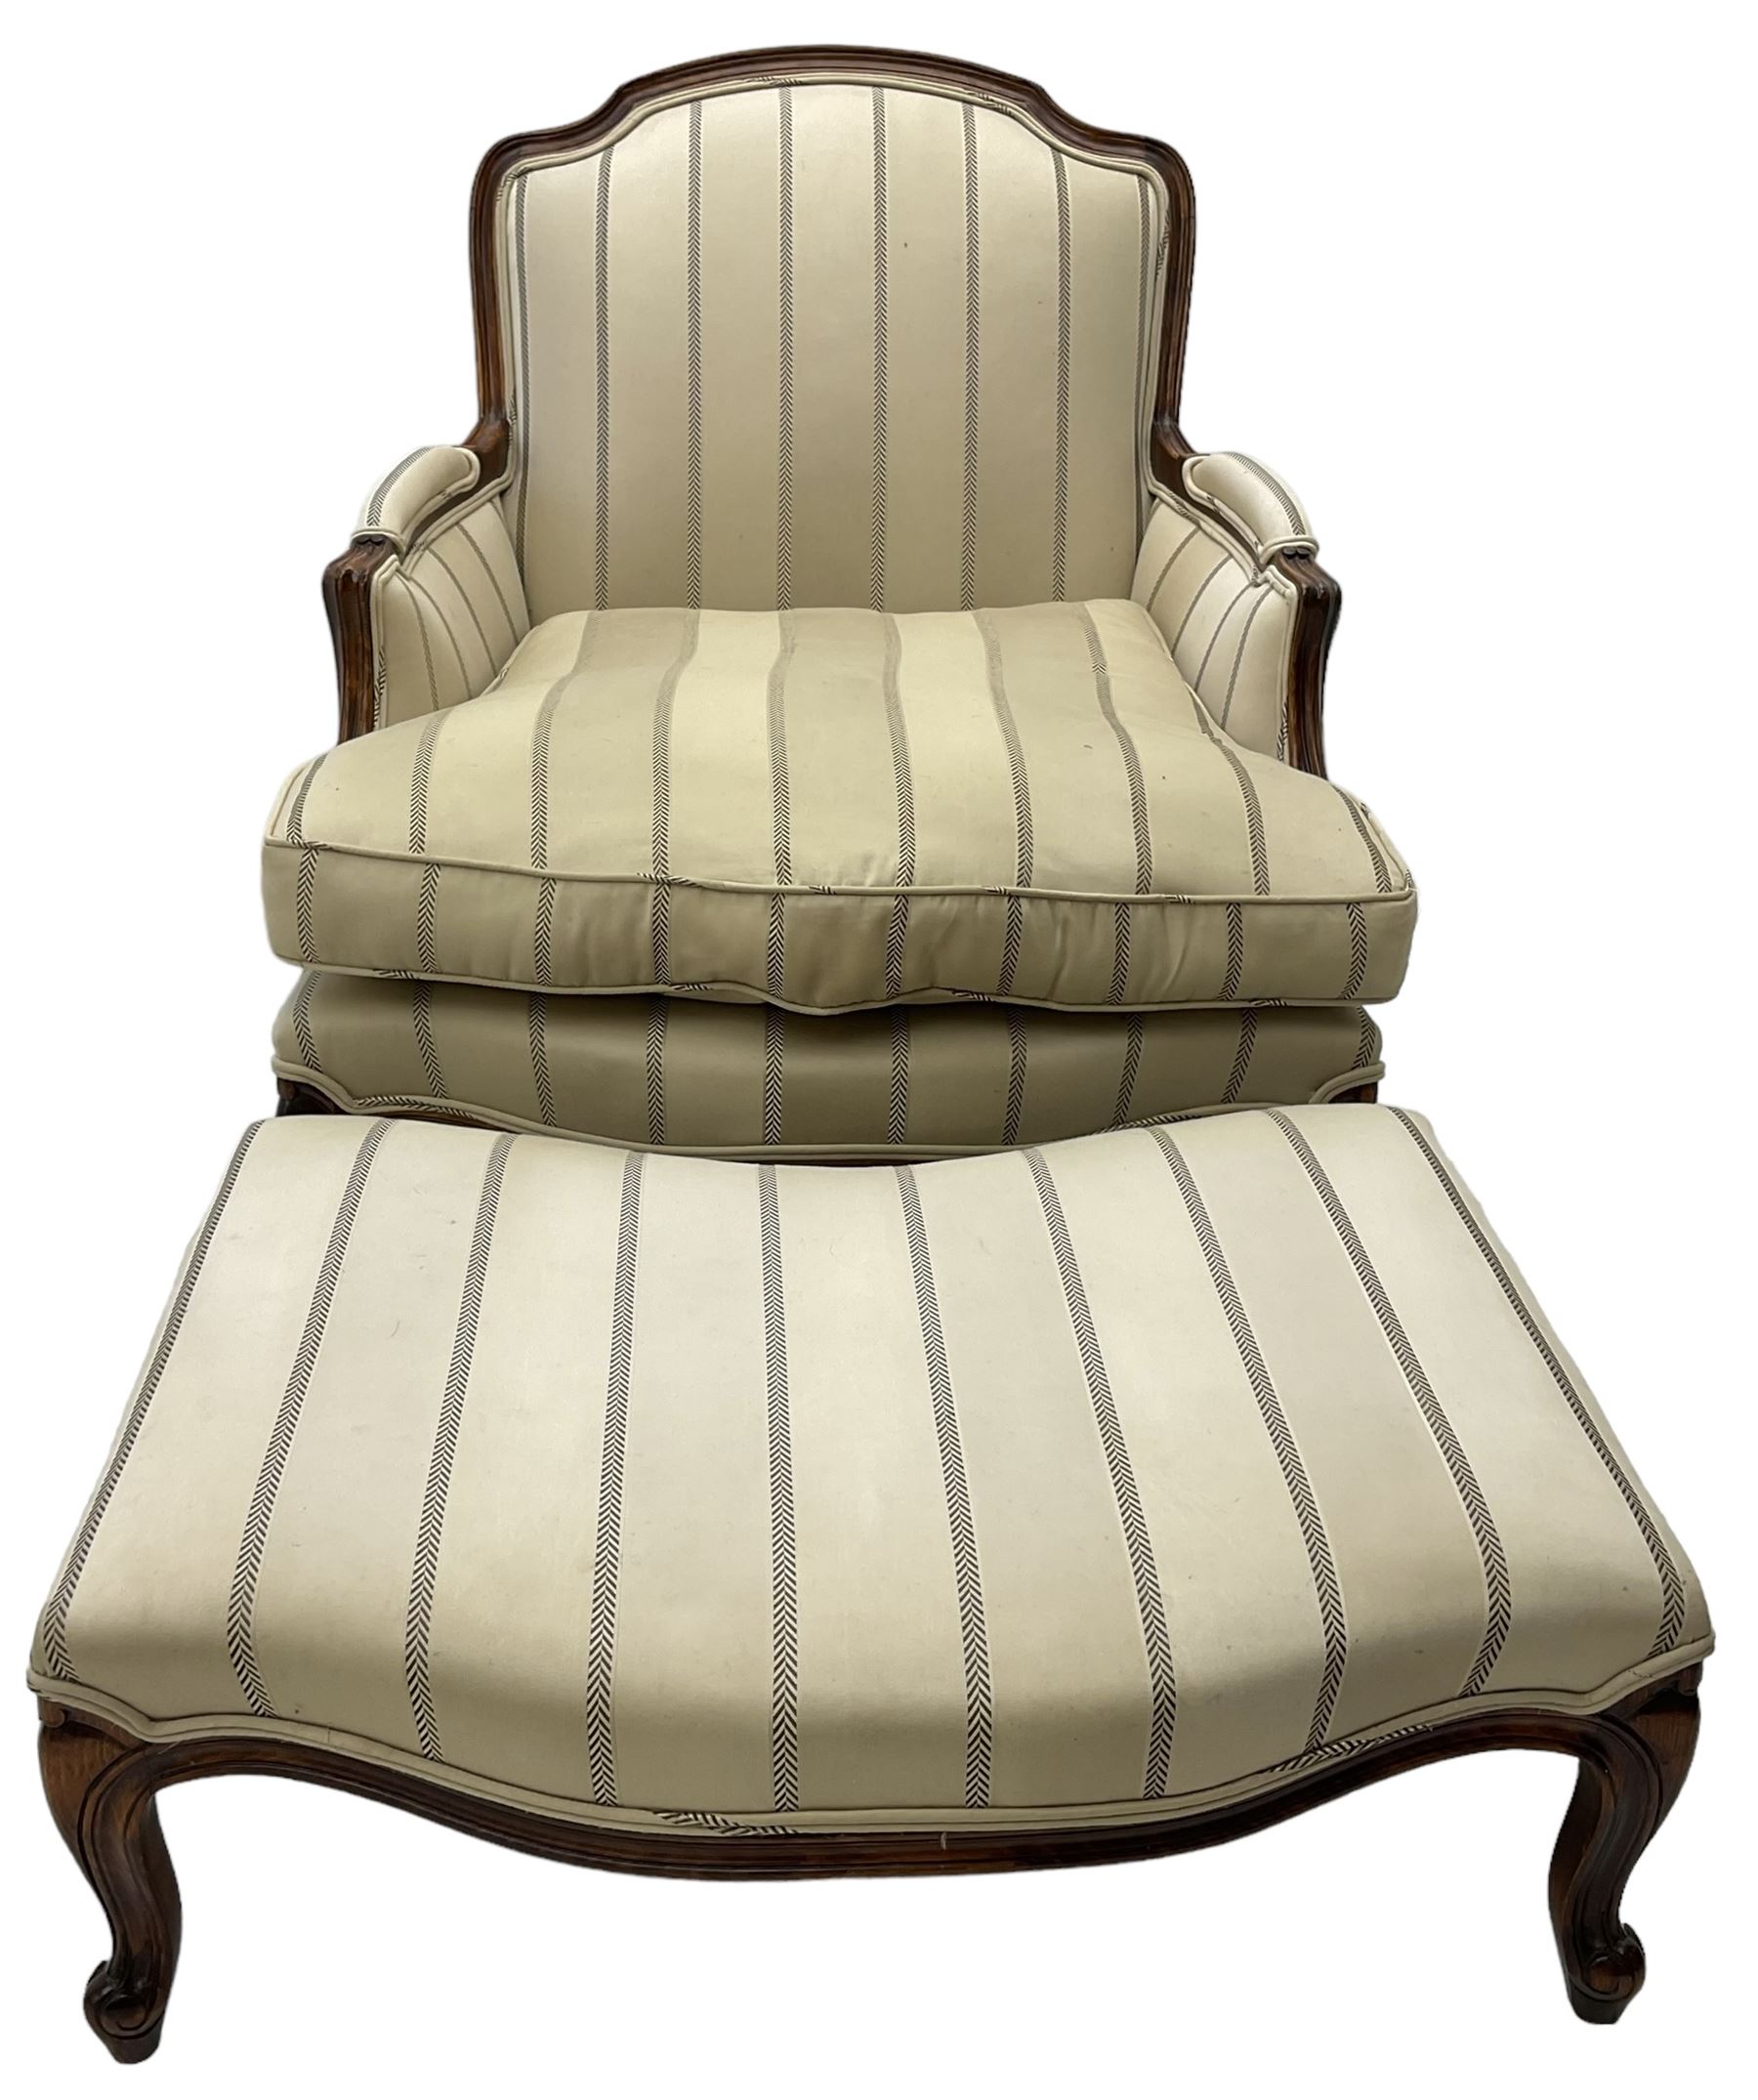 French Louis XV design armchair - Image 3 of 6